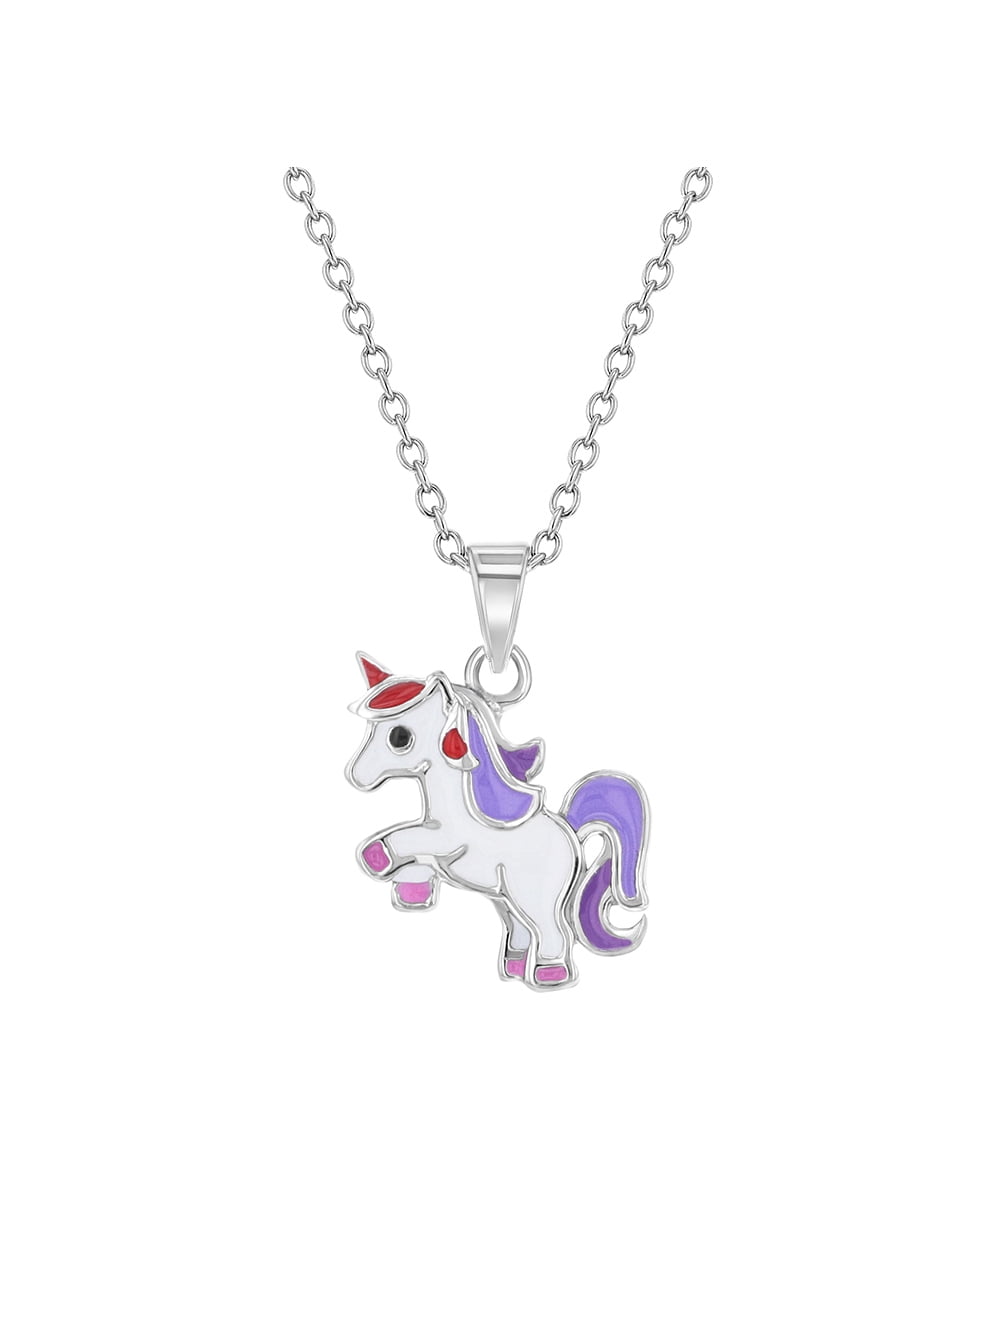  Daiasns Necklace for Girls, Unicorn Necklace Gifts for Girls  Jewelry Age 6-8 Heart Pendant Necklace Granddaughter Birthday Necklace from  Grandma Cute Colorful Cubic Zirconia Necklace: Clothing, Shoes & Jewelry